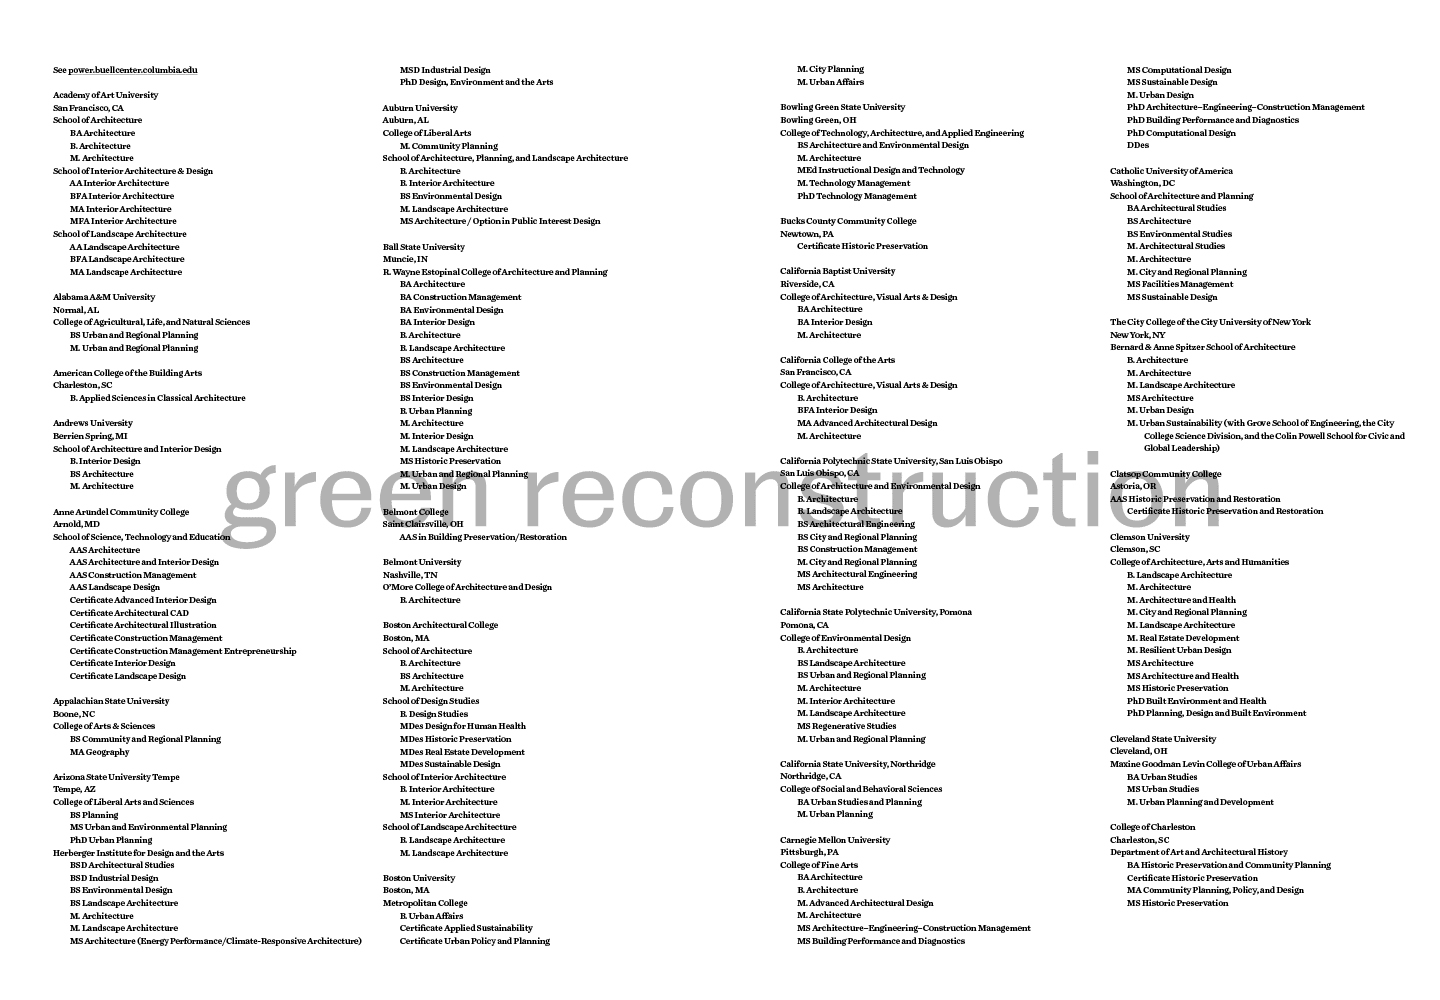 a long list of academic programs cycles underneath a watermark that reads "green reconstruction"